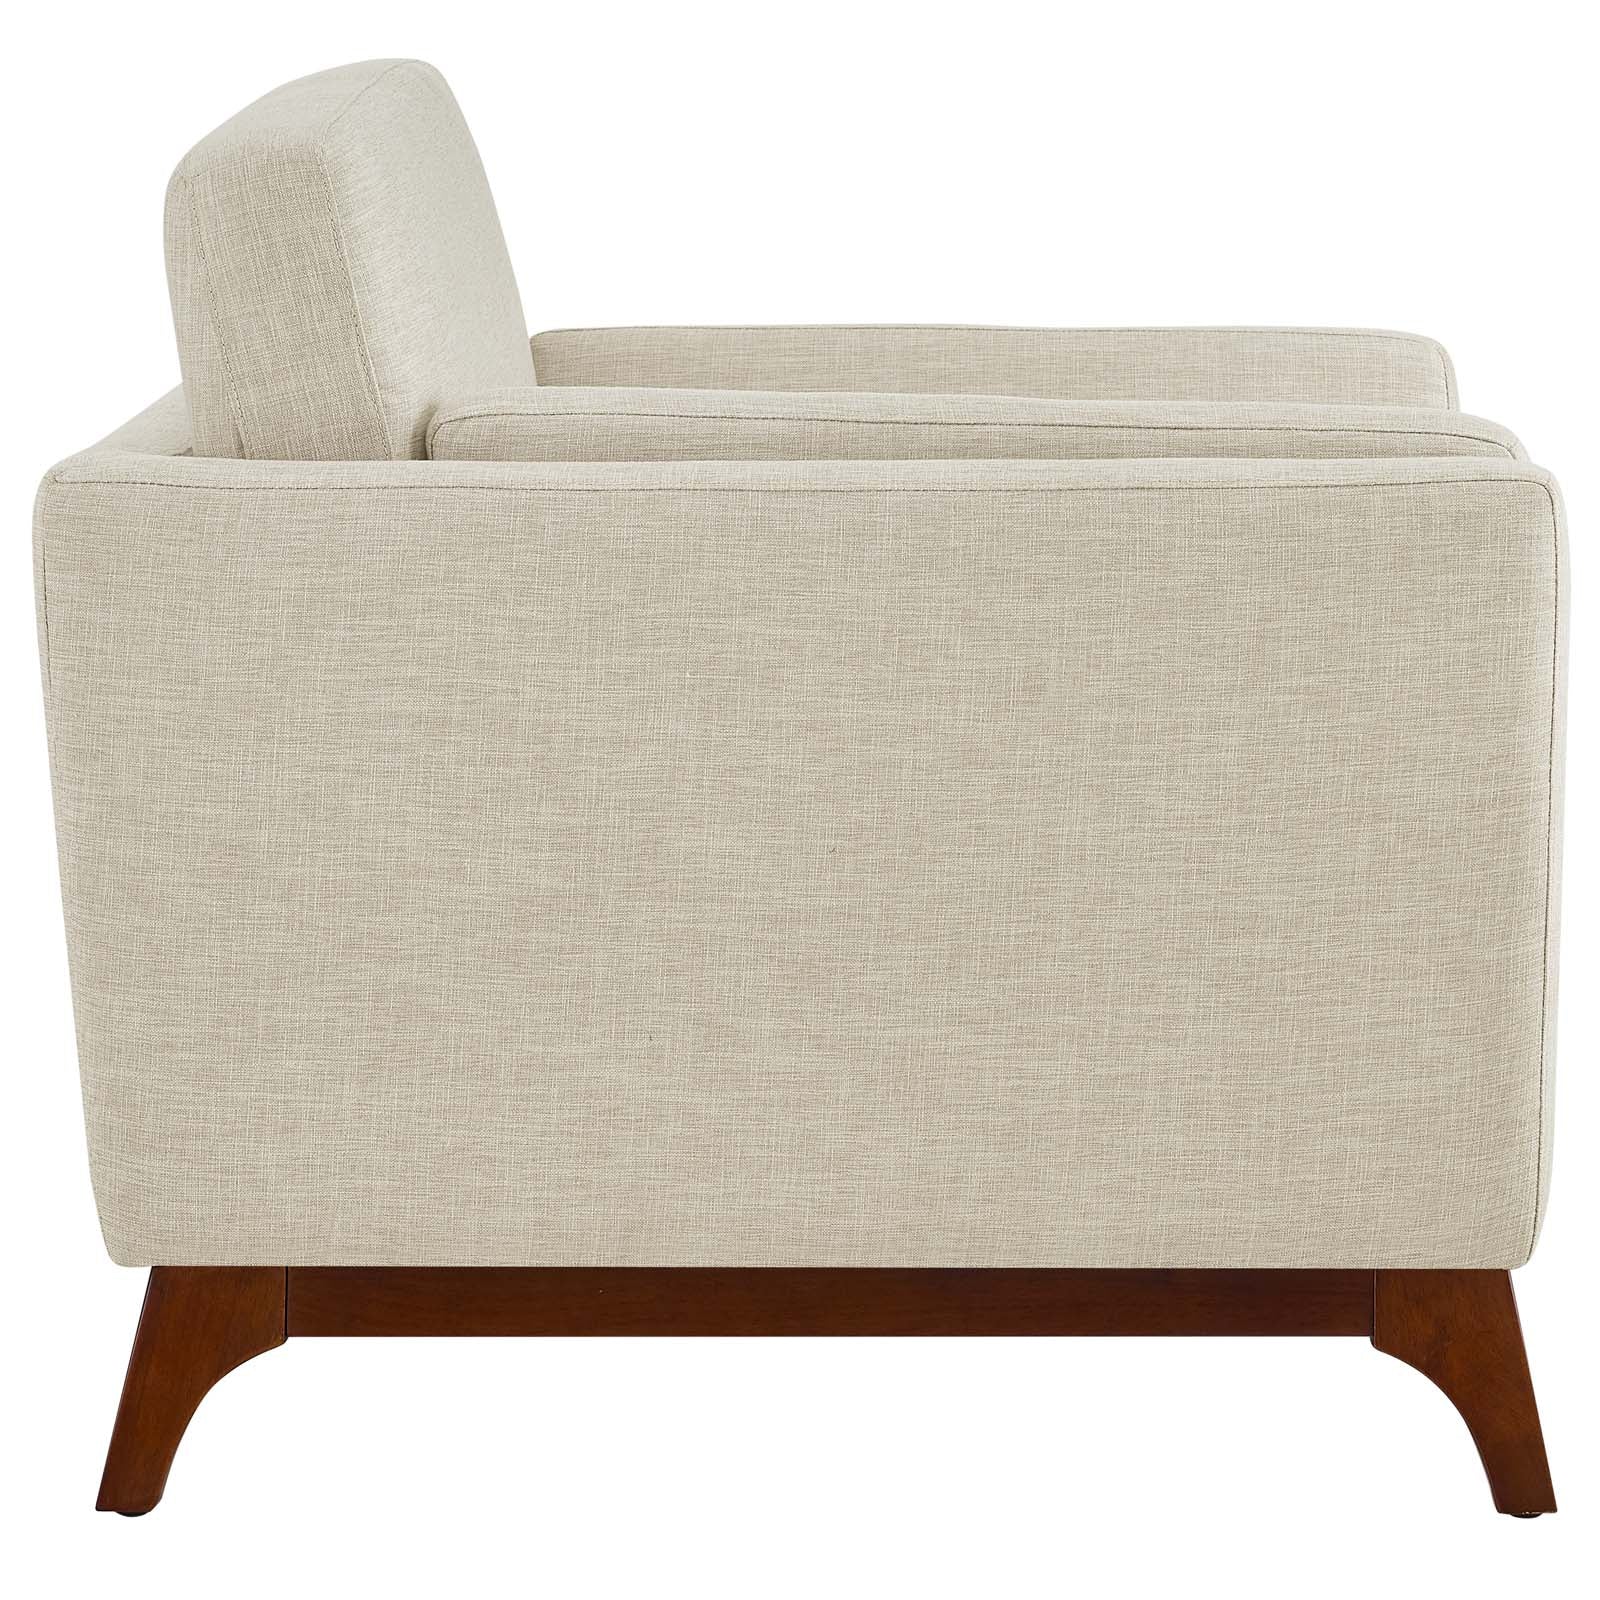 Modway Accent Chairs - Chance Upholstered Fabric Armchair Beige